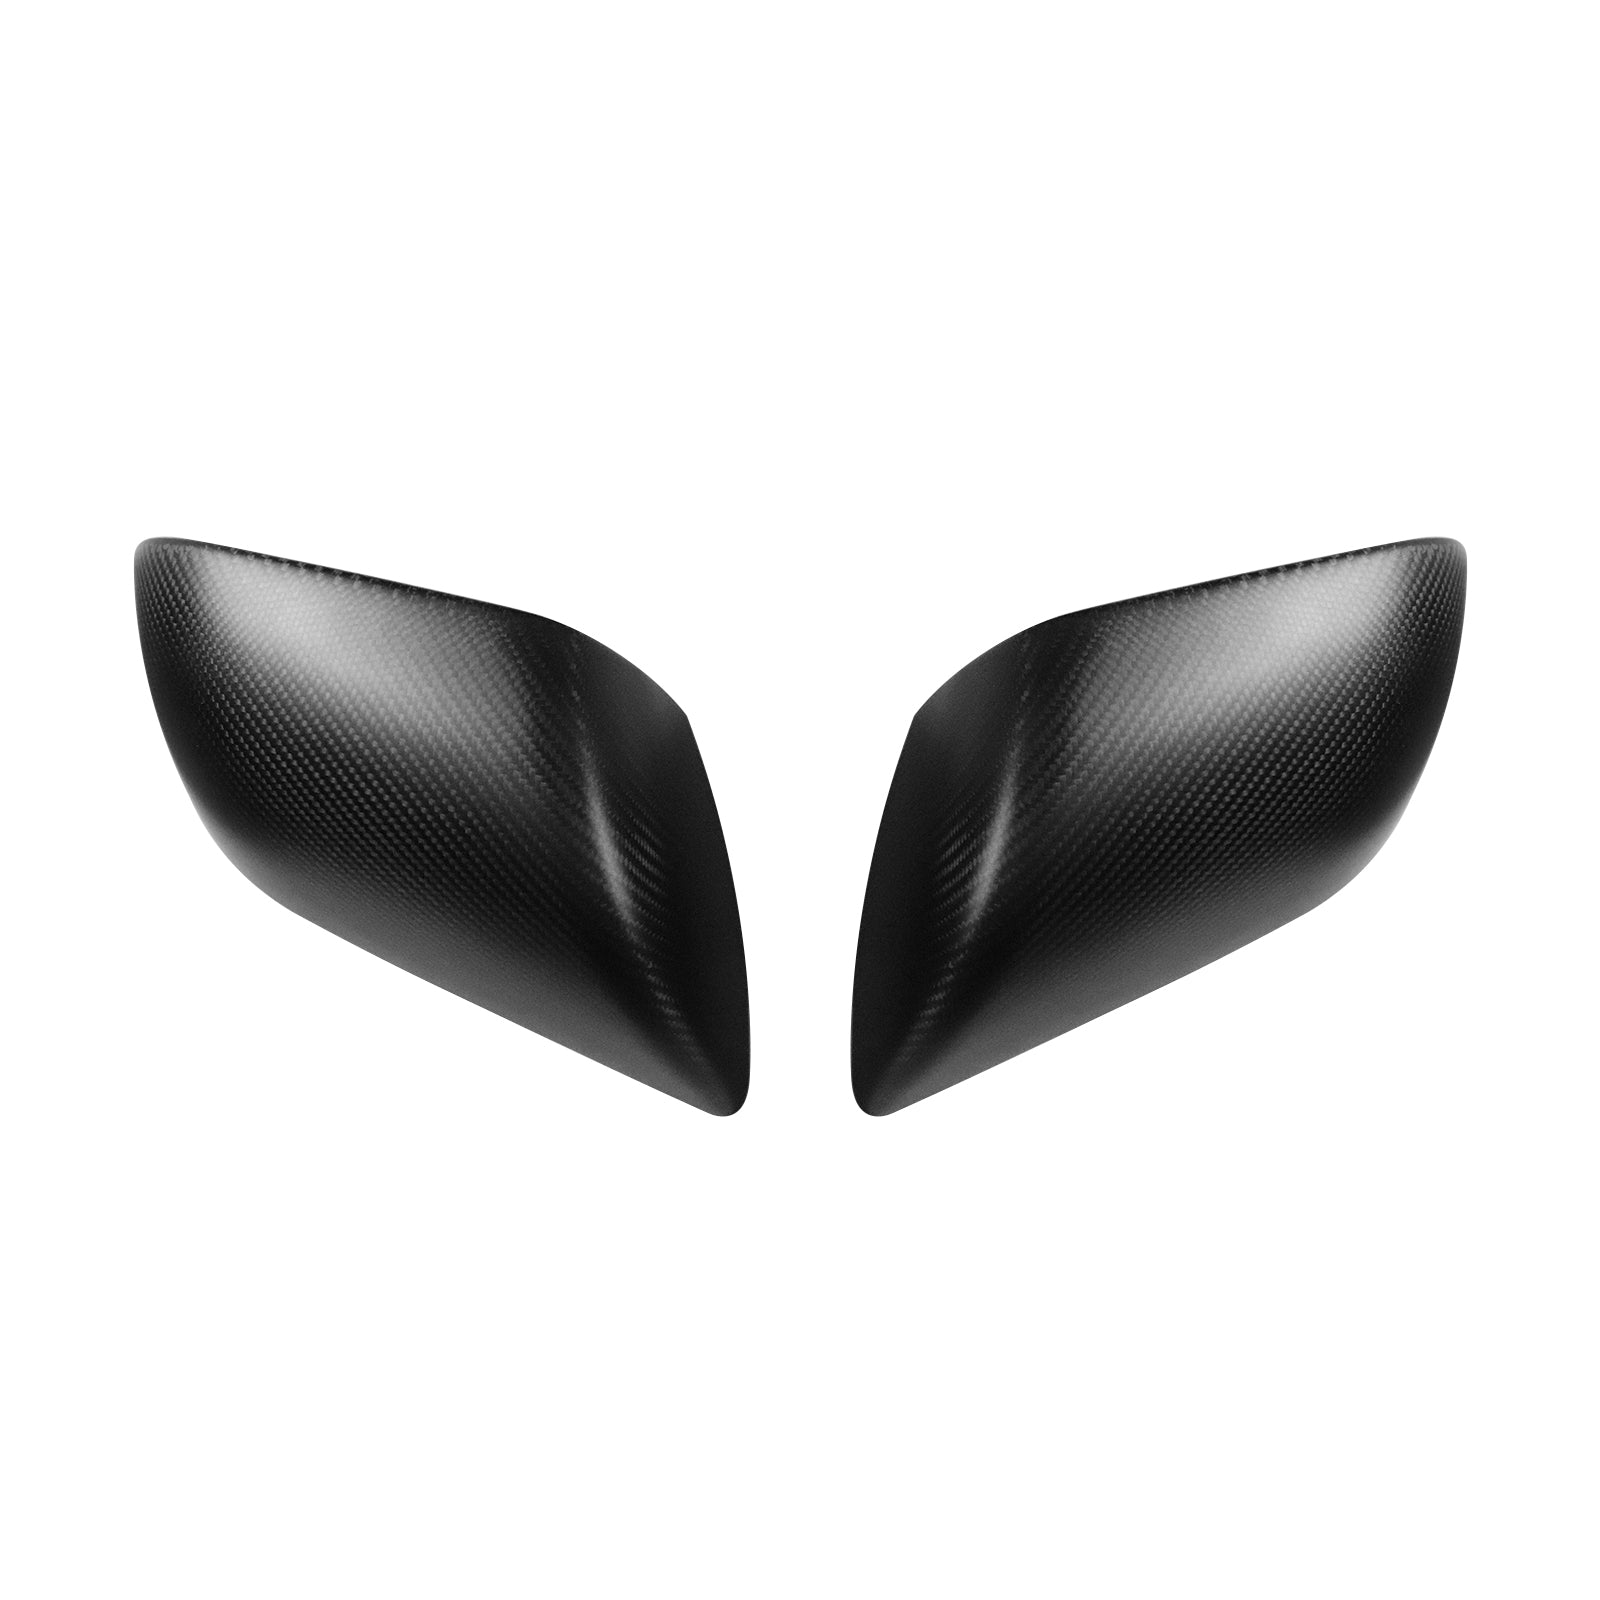 TEMAI REAL CARBON EXTERIOR REAR VIEW SIDE MIRROR GUARD COVER TRIM FOR MODEL 3/Y